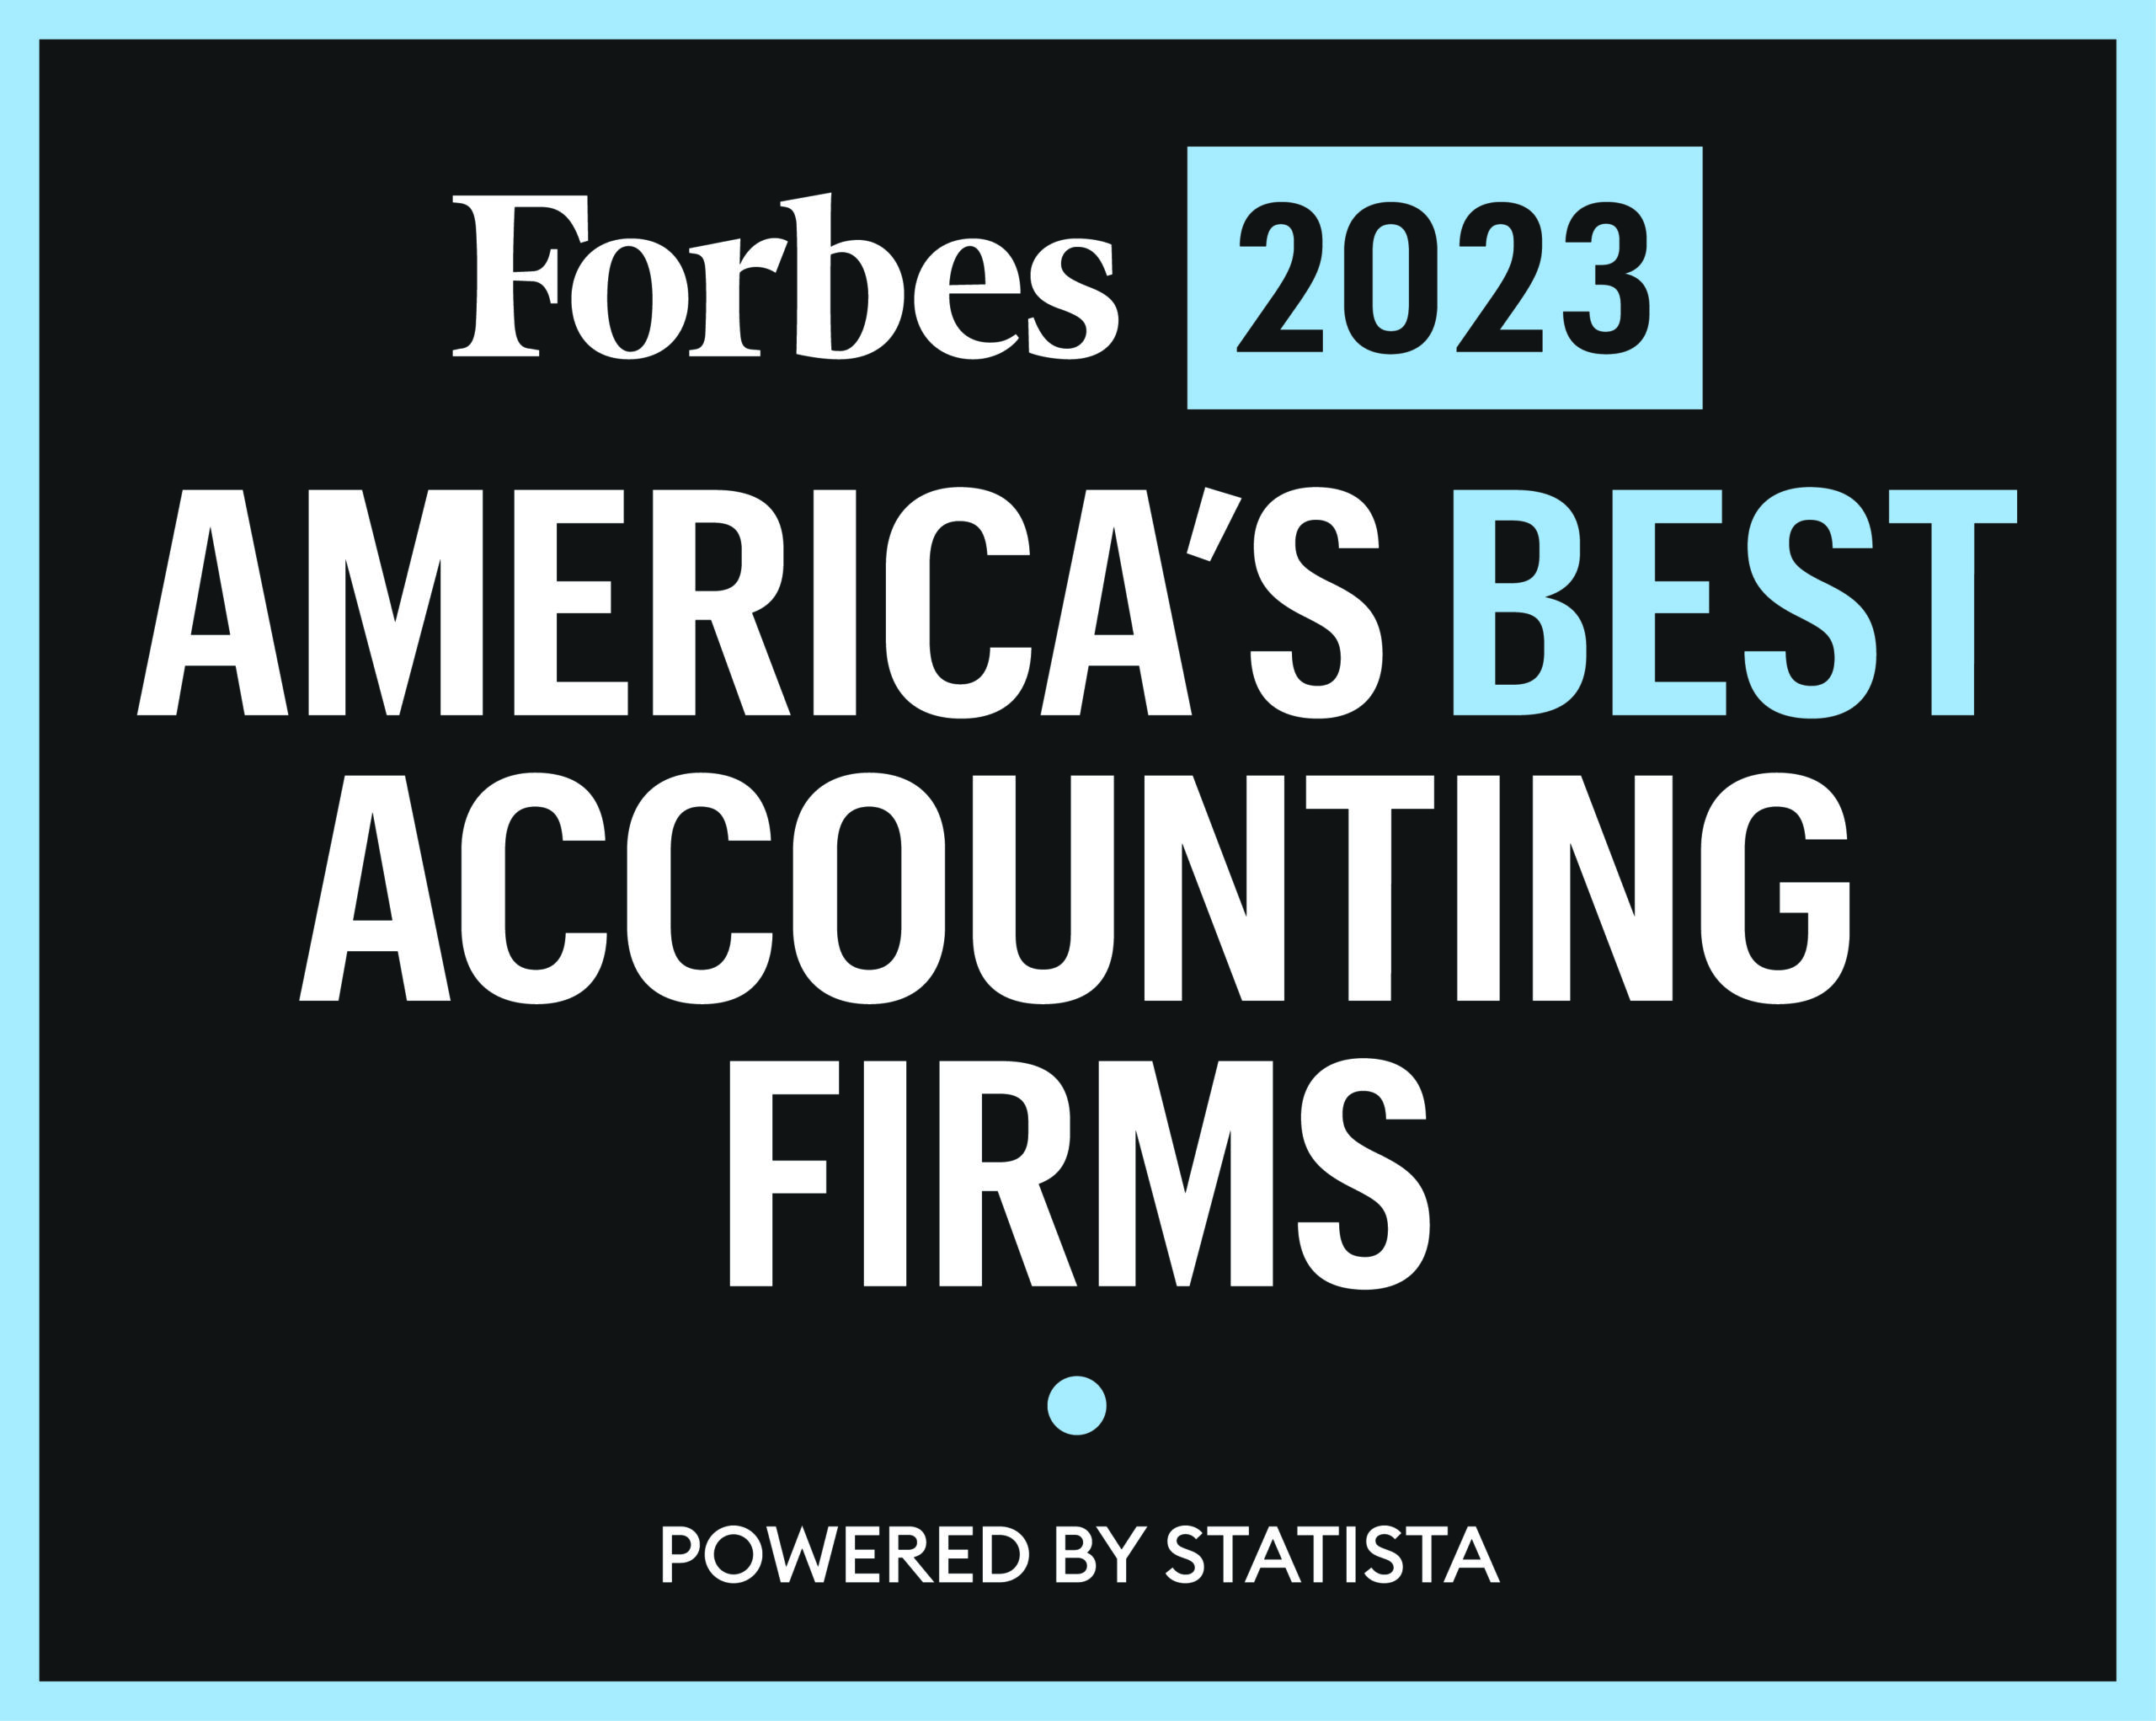 Forbes 2023 America's Best Accounting Firms